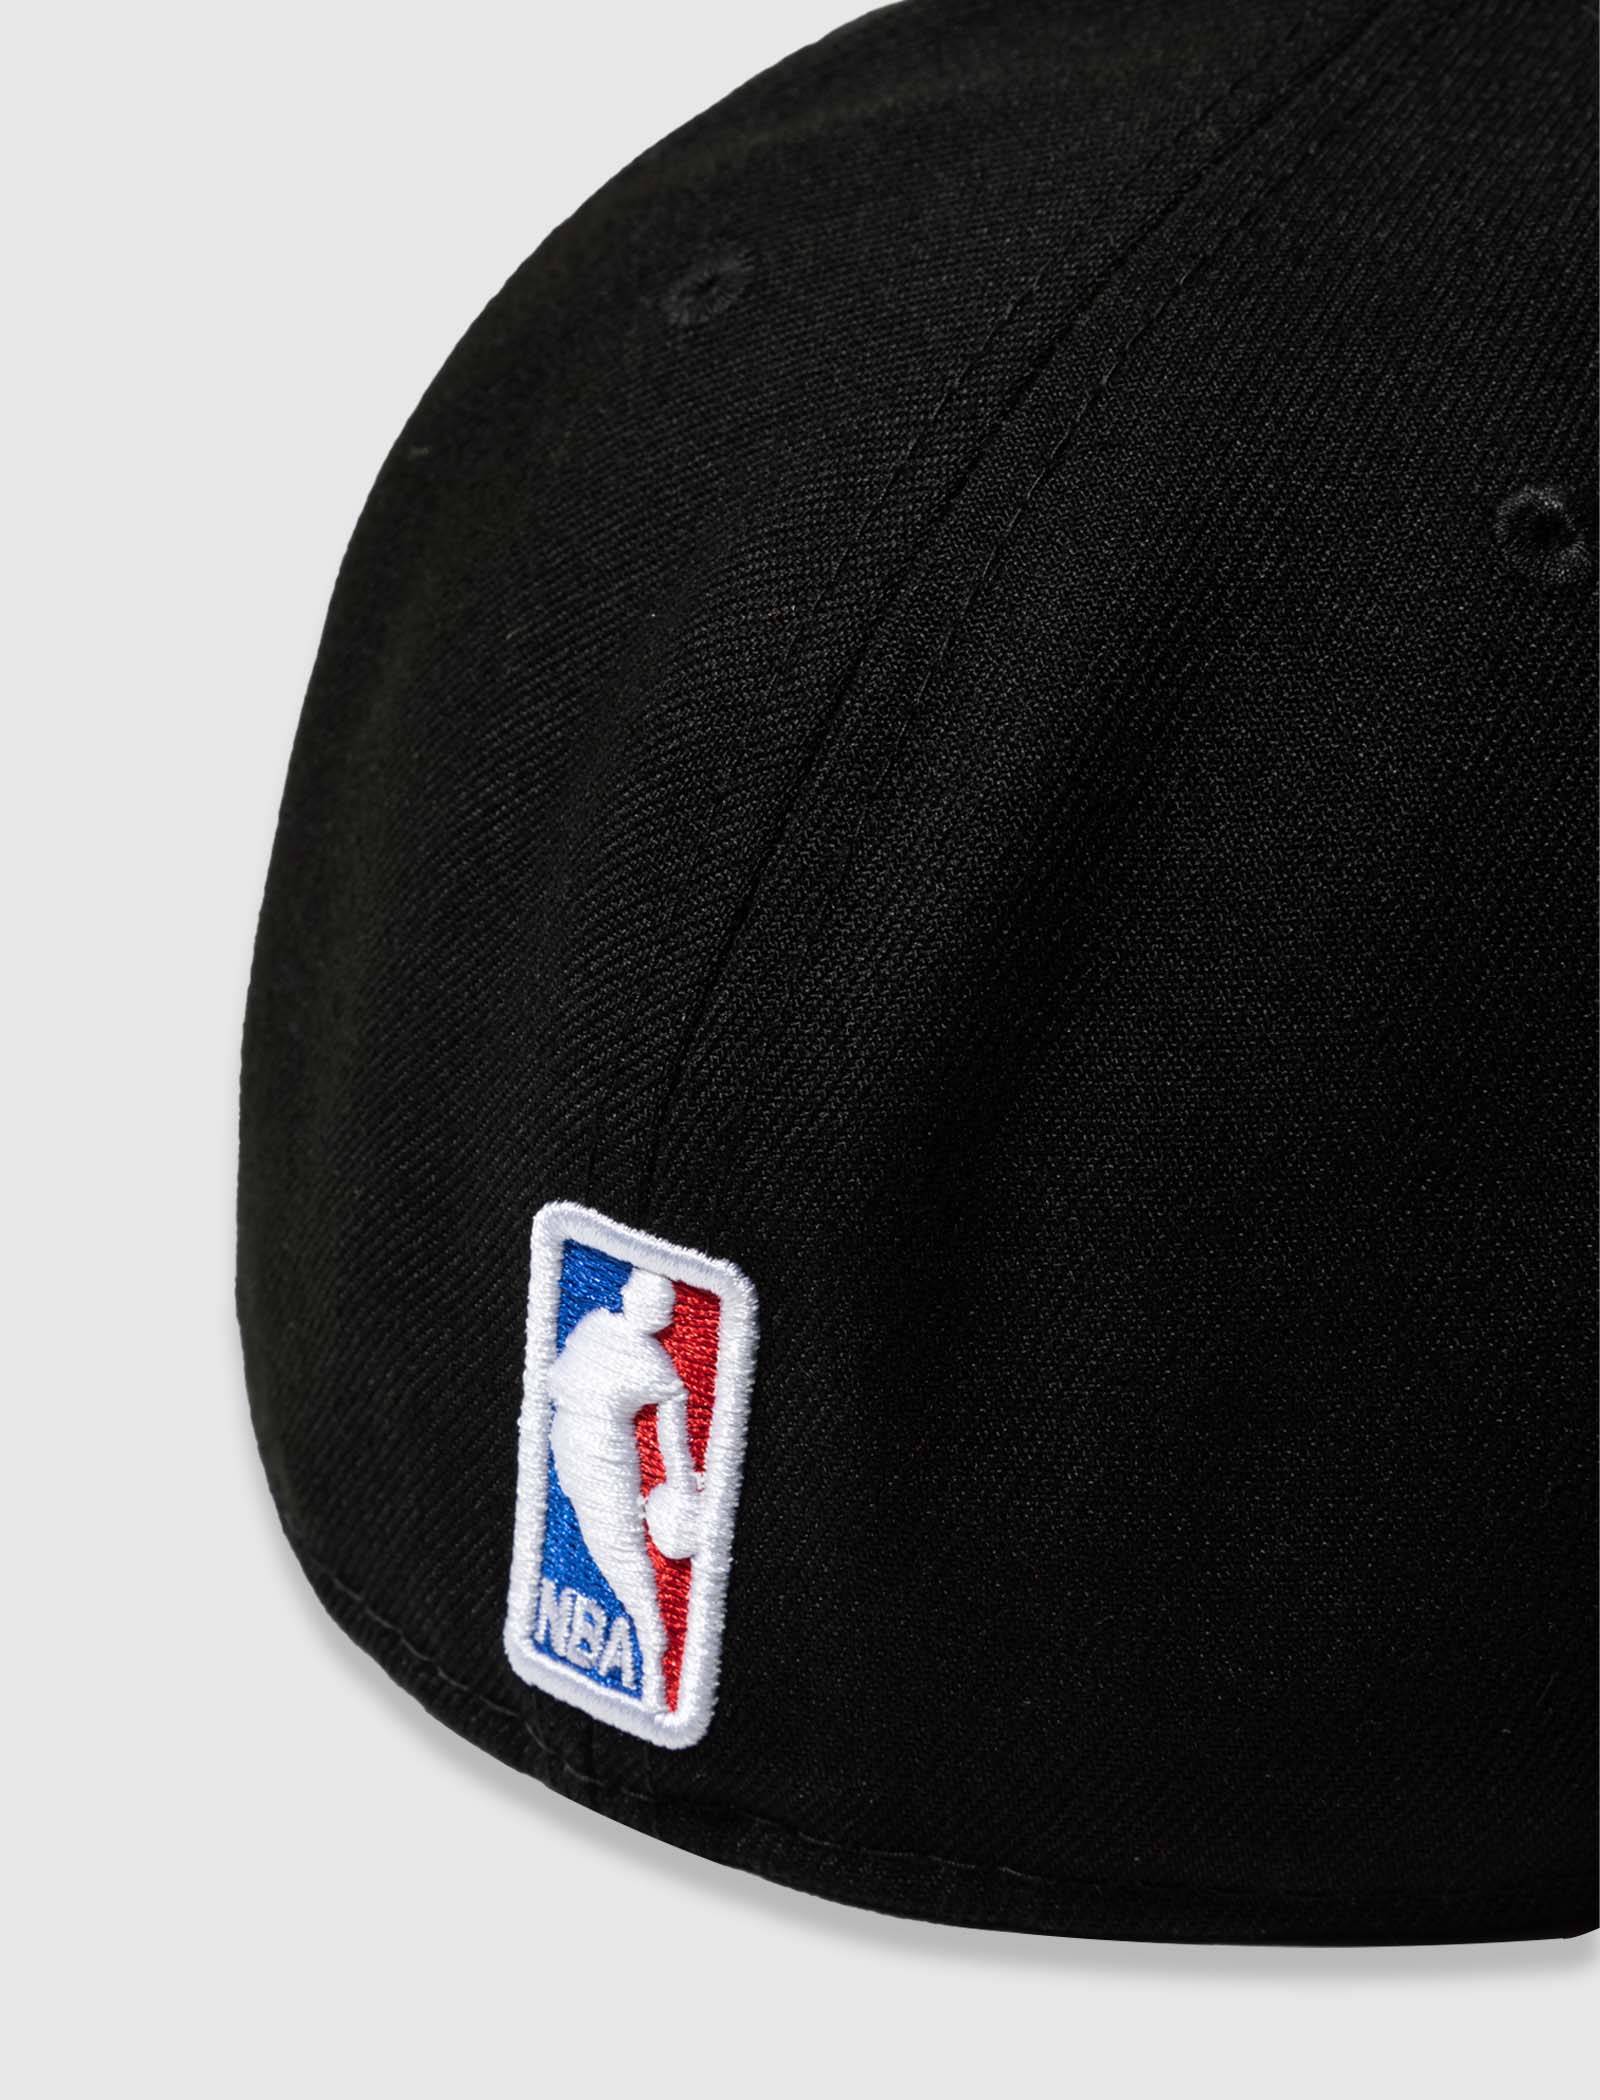 New Era Just Don LOS ANGELES LAKERS 59FIFTY FITTED (Black) – The Shop 147